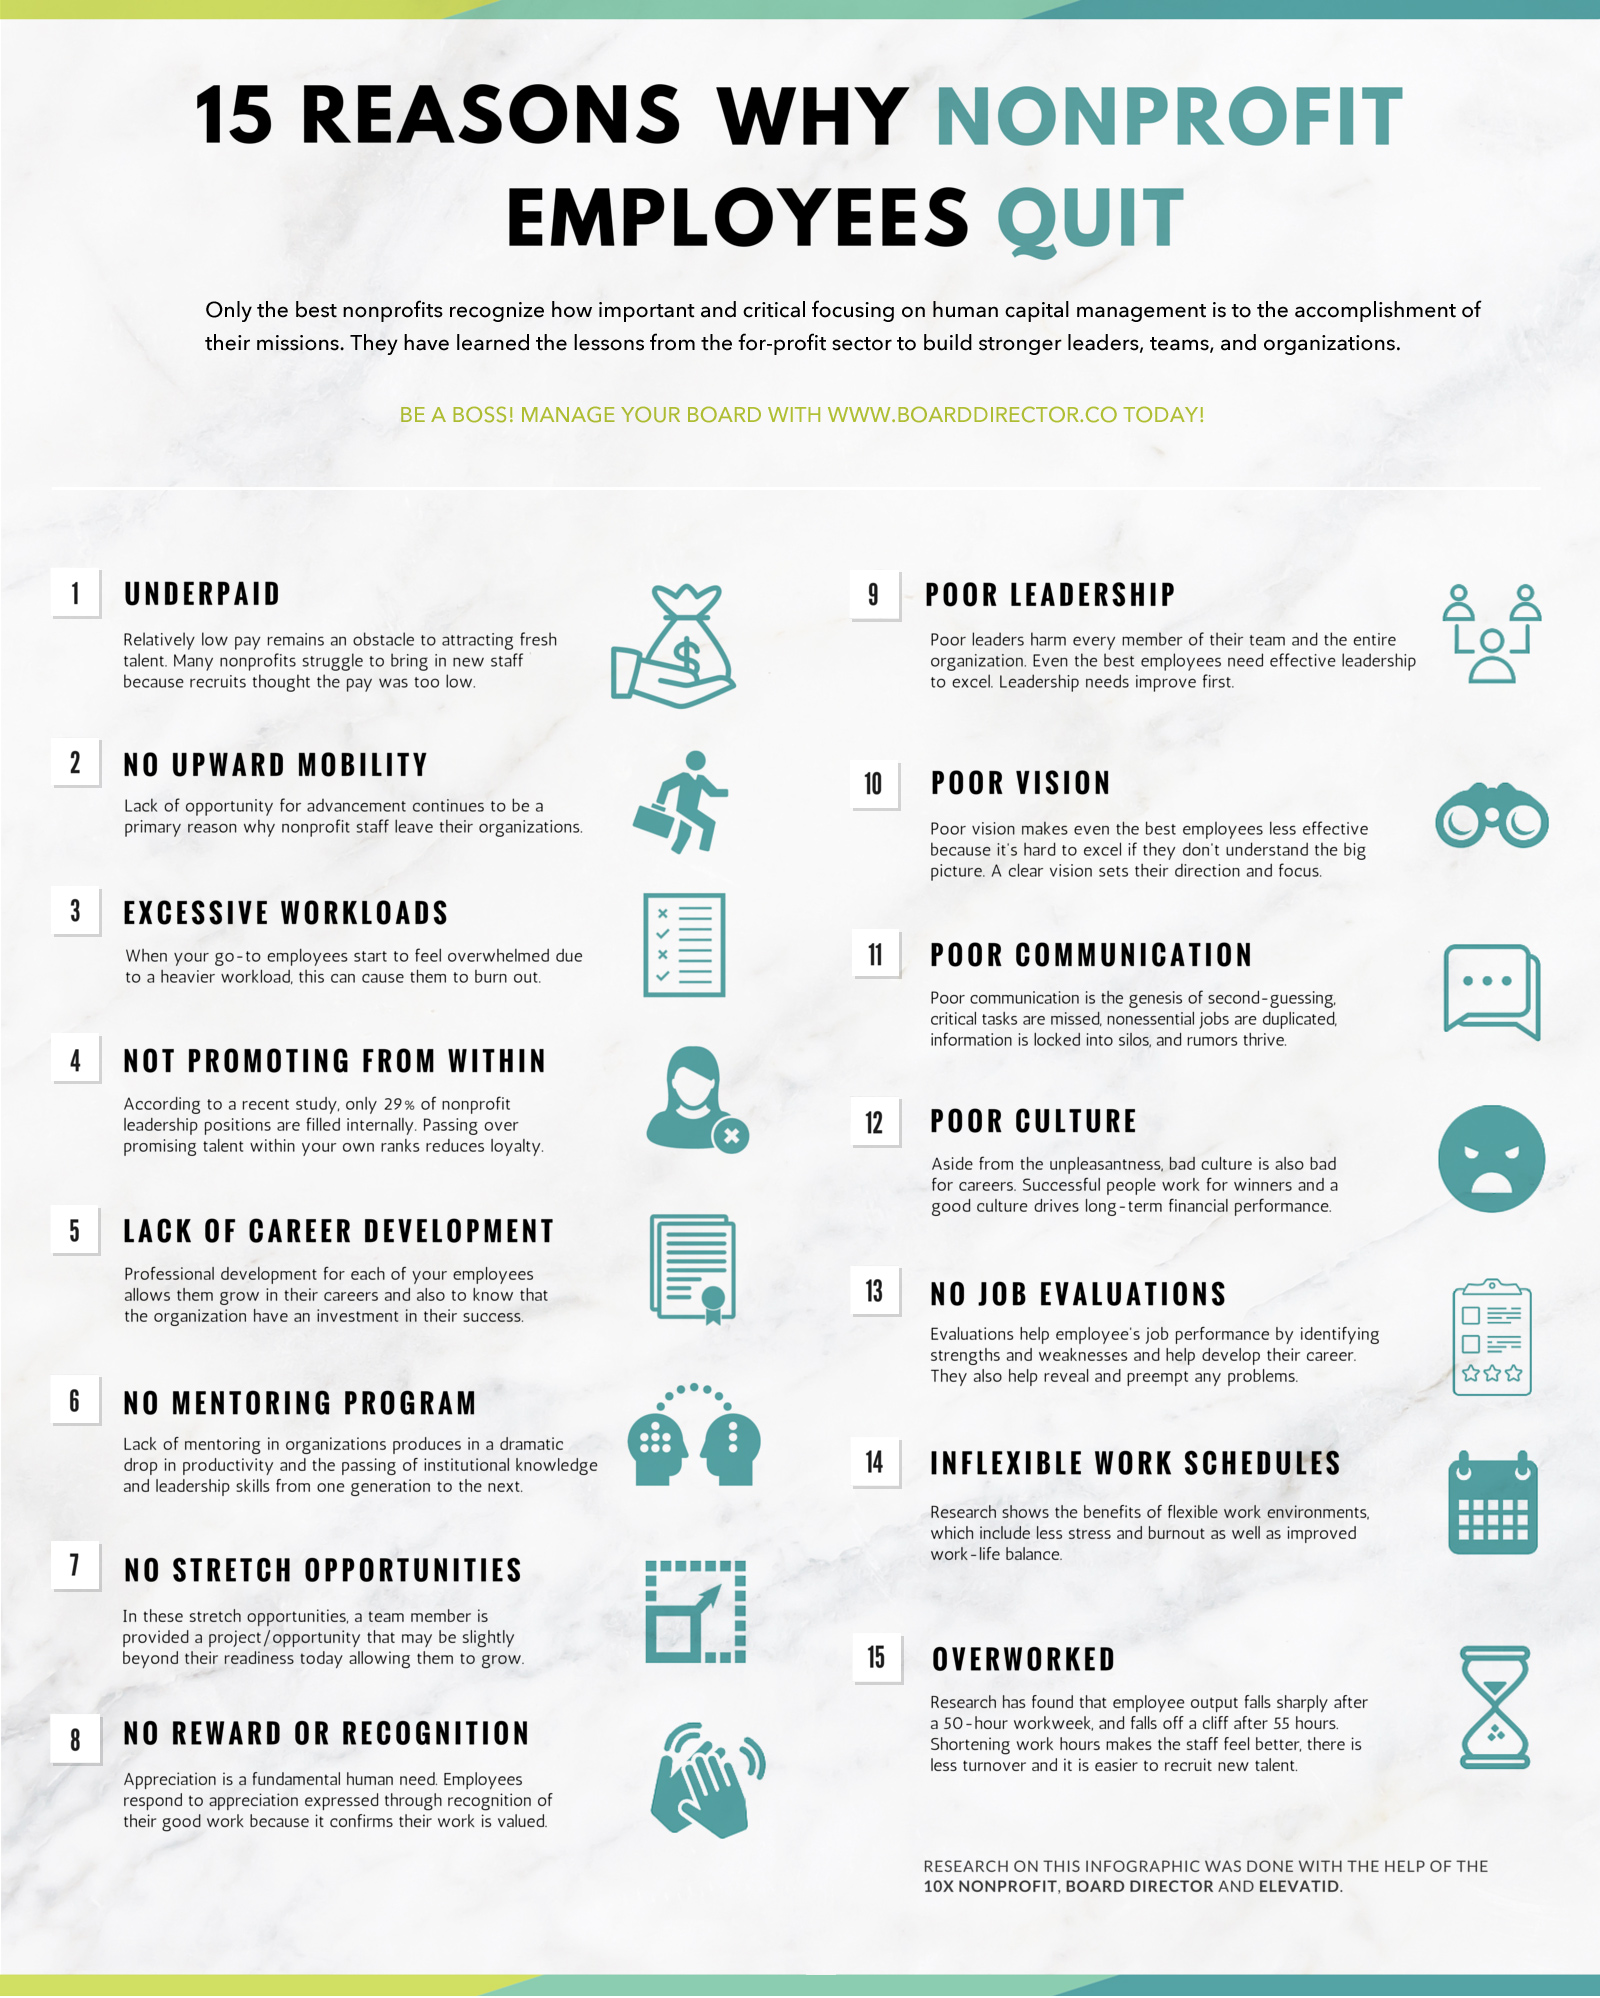 15 reasons why employees at charities and nonprofits quit